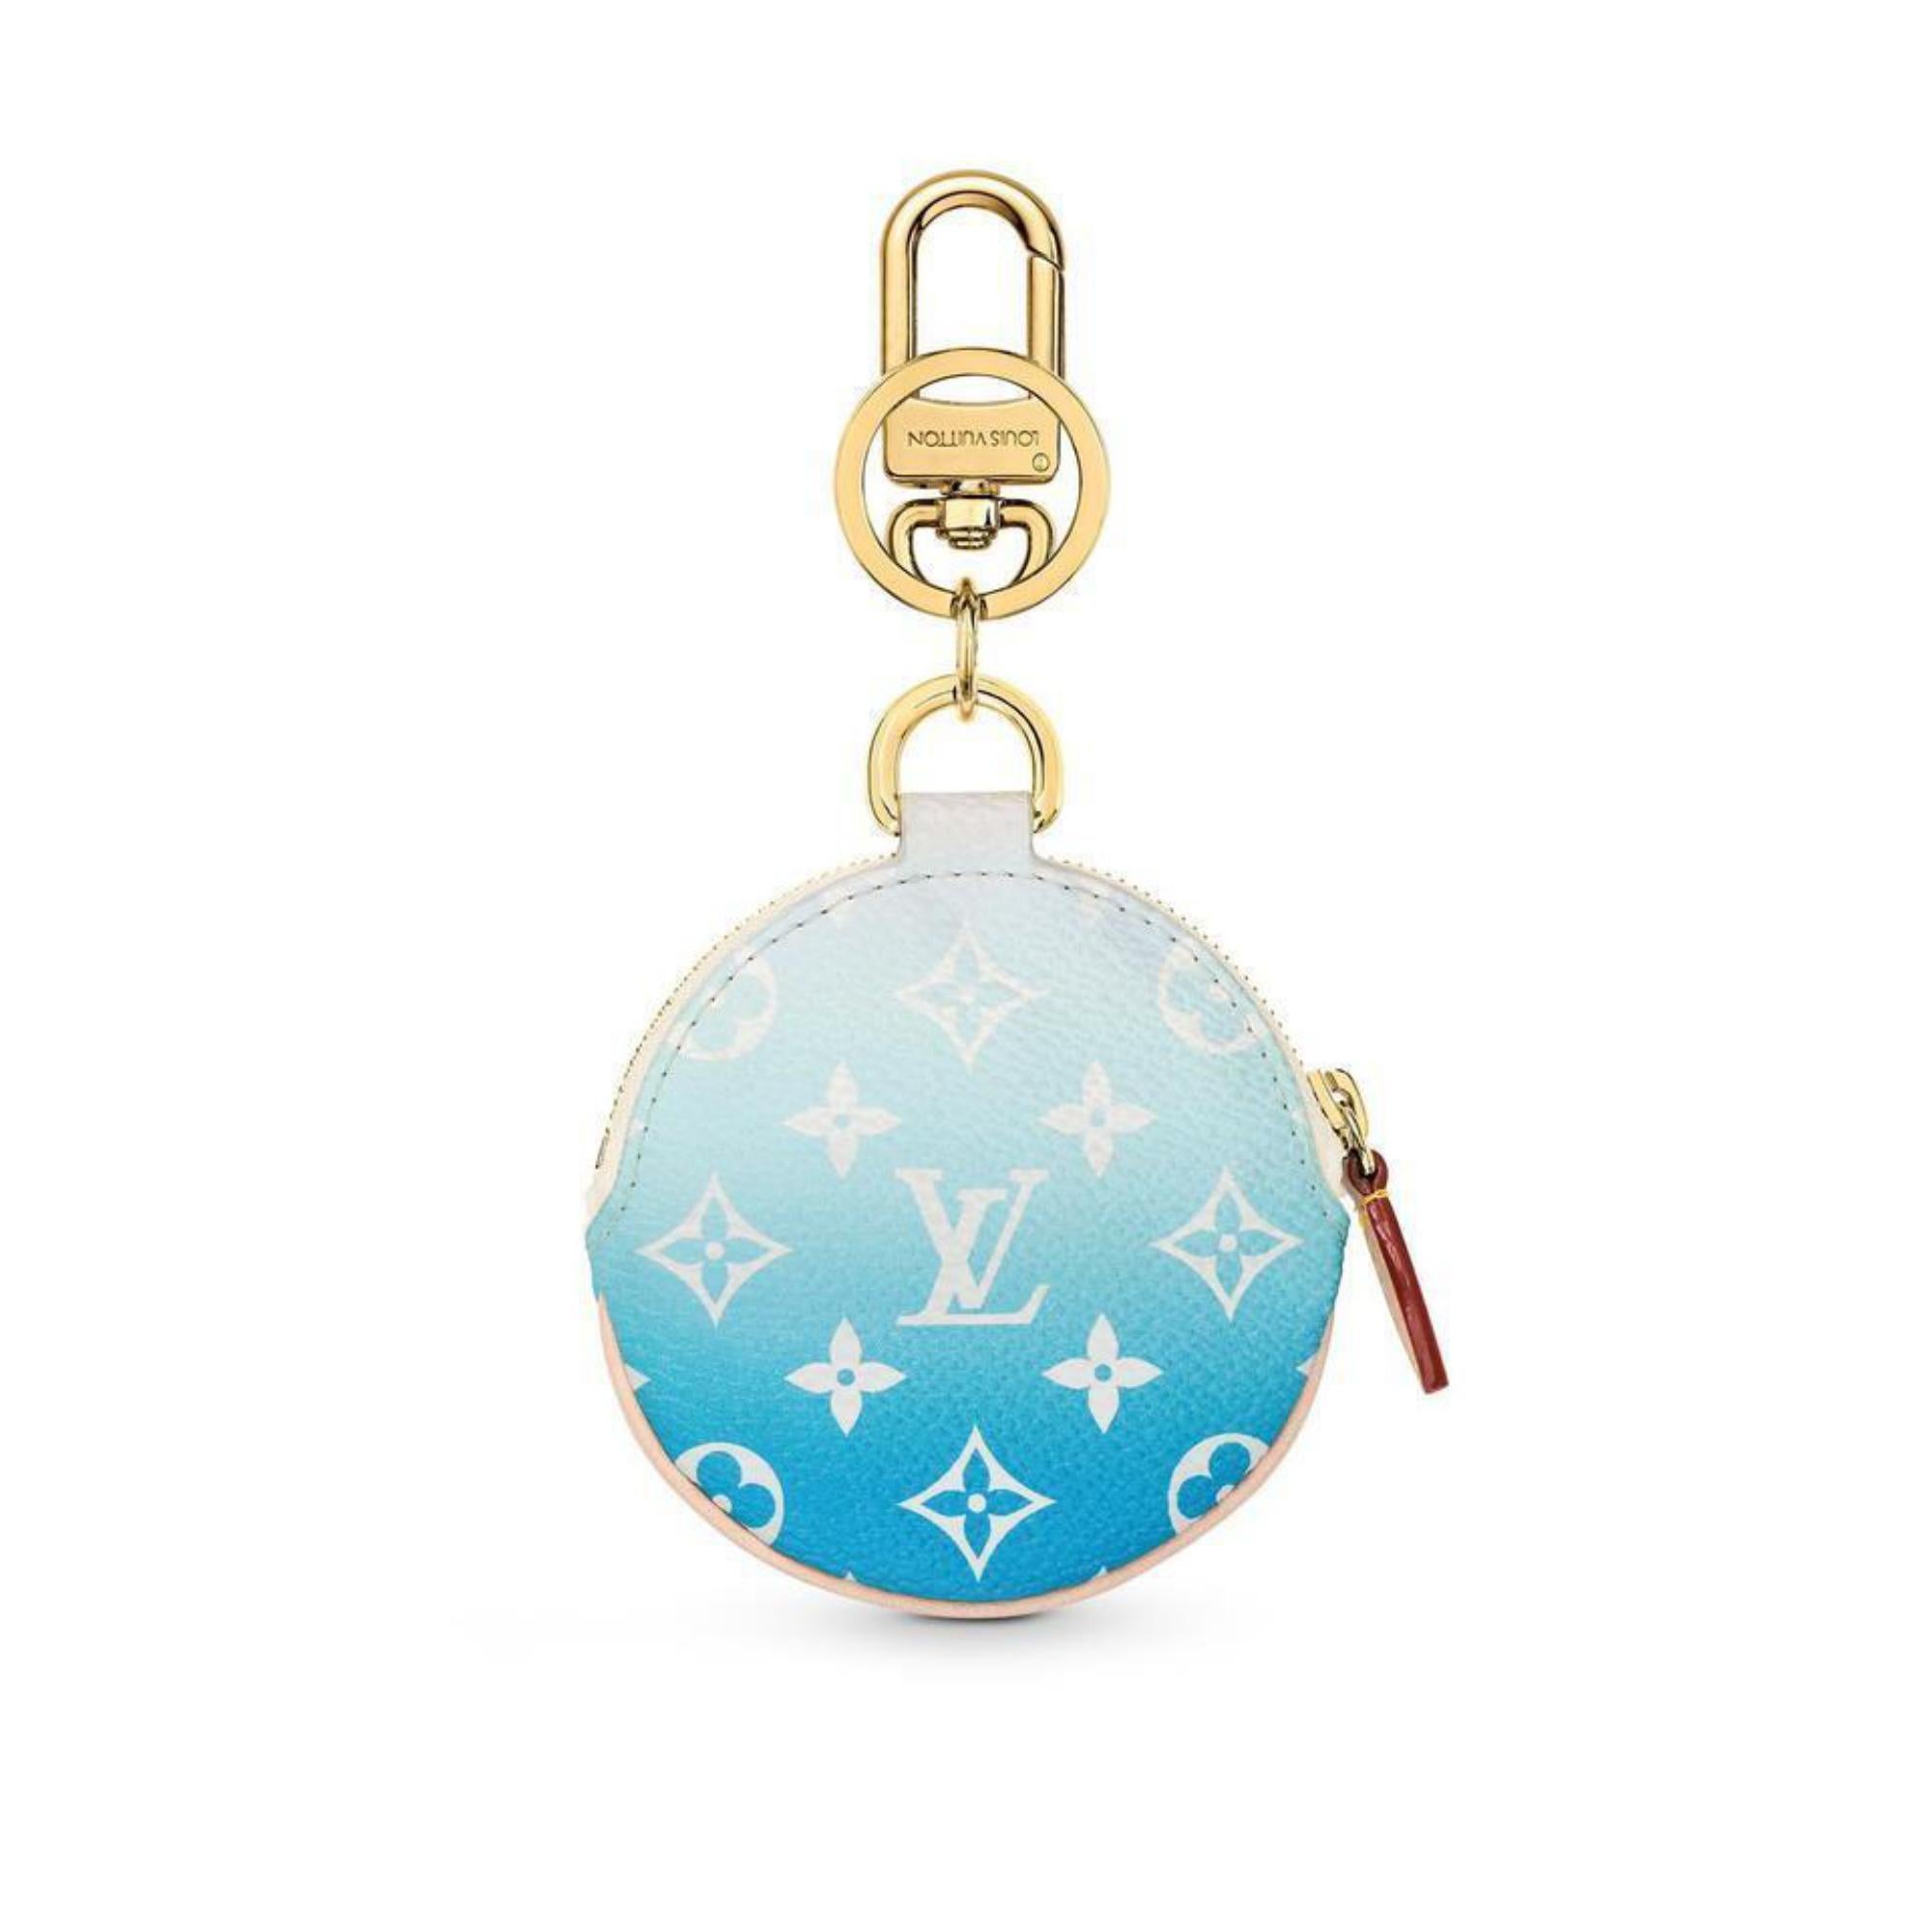 Louis Vuitton Blue Monogram Multipochette Lanyard Key Pouch Round Coin 1LK119a
Date Code/Serial Number: RFID Chip
Made In: Italy
Measurements: Length:  3